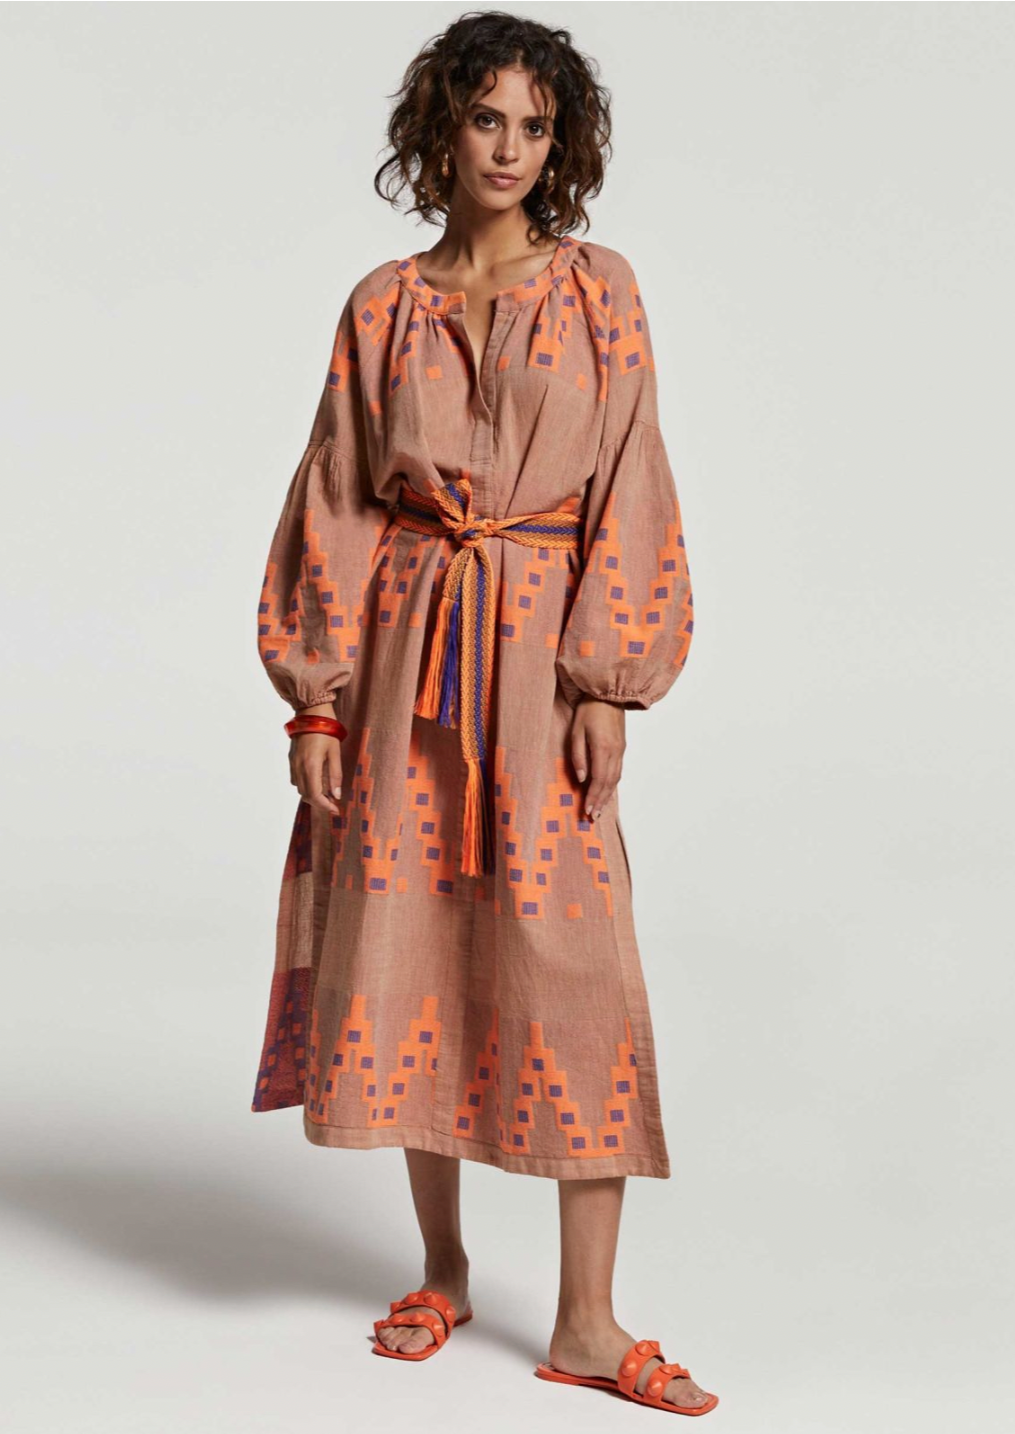 Devotion Korali Dress - Beige/Orange The Korali Maxi dress from Devotion Twins is a vacation essential. Made with an airy cotton blend and featuring Devotion's distinct geometric jacquard pattern all over, this piece is complete with a snap button detail V-neck and a woven waist belt. Dropped shoulder balloon sleeves and side slits add the finishing touch to this relaxed look.  Wear free and easy, or belt to elevate your look for evenings out